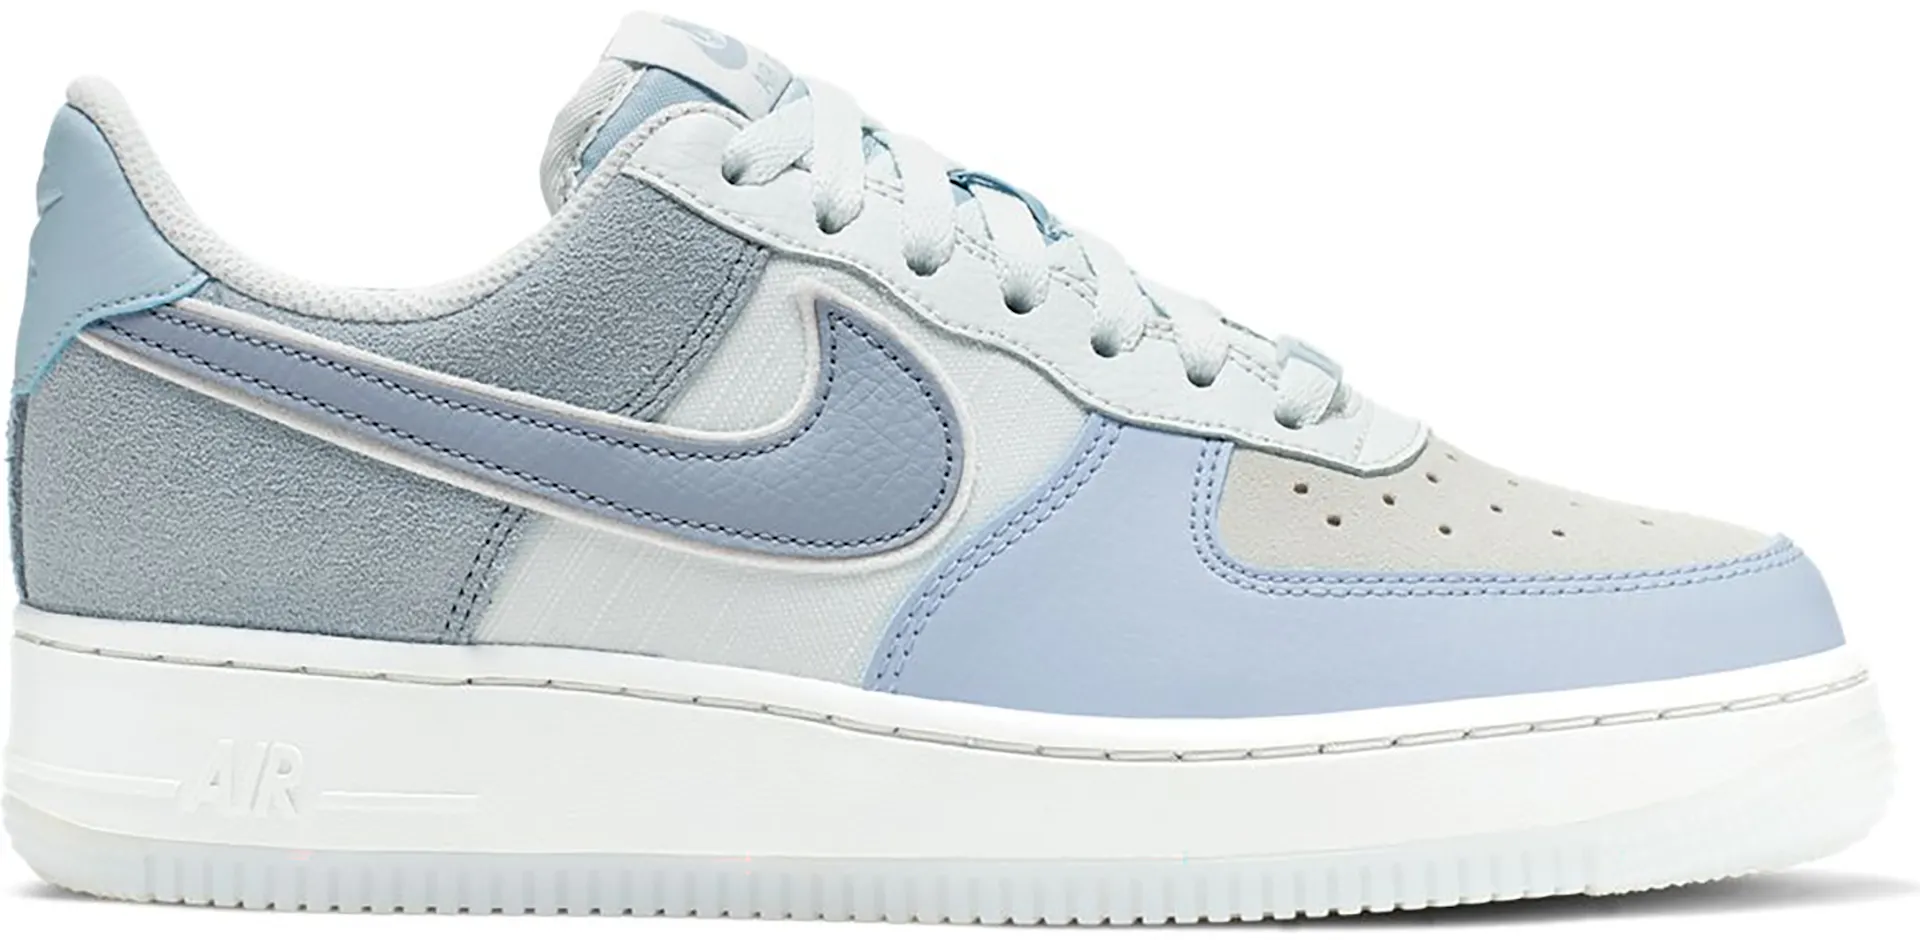 Nike Air Force 1 Low Light Armory Blue (W) - 896185-401 - US